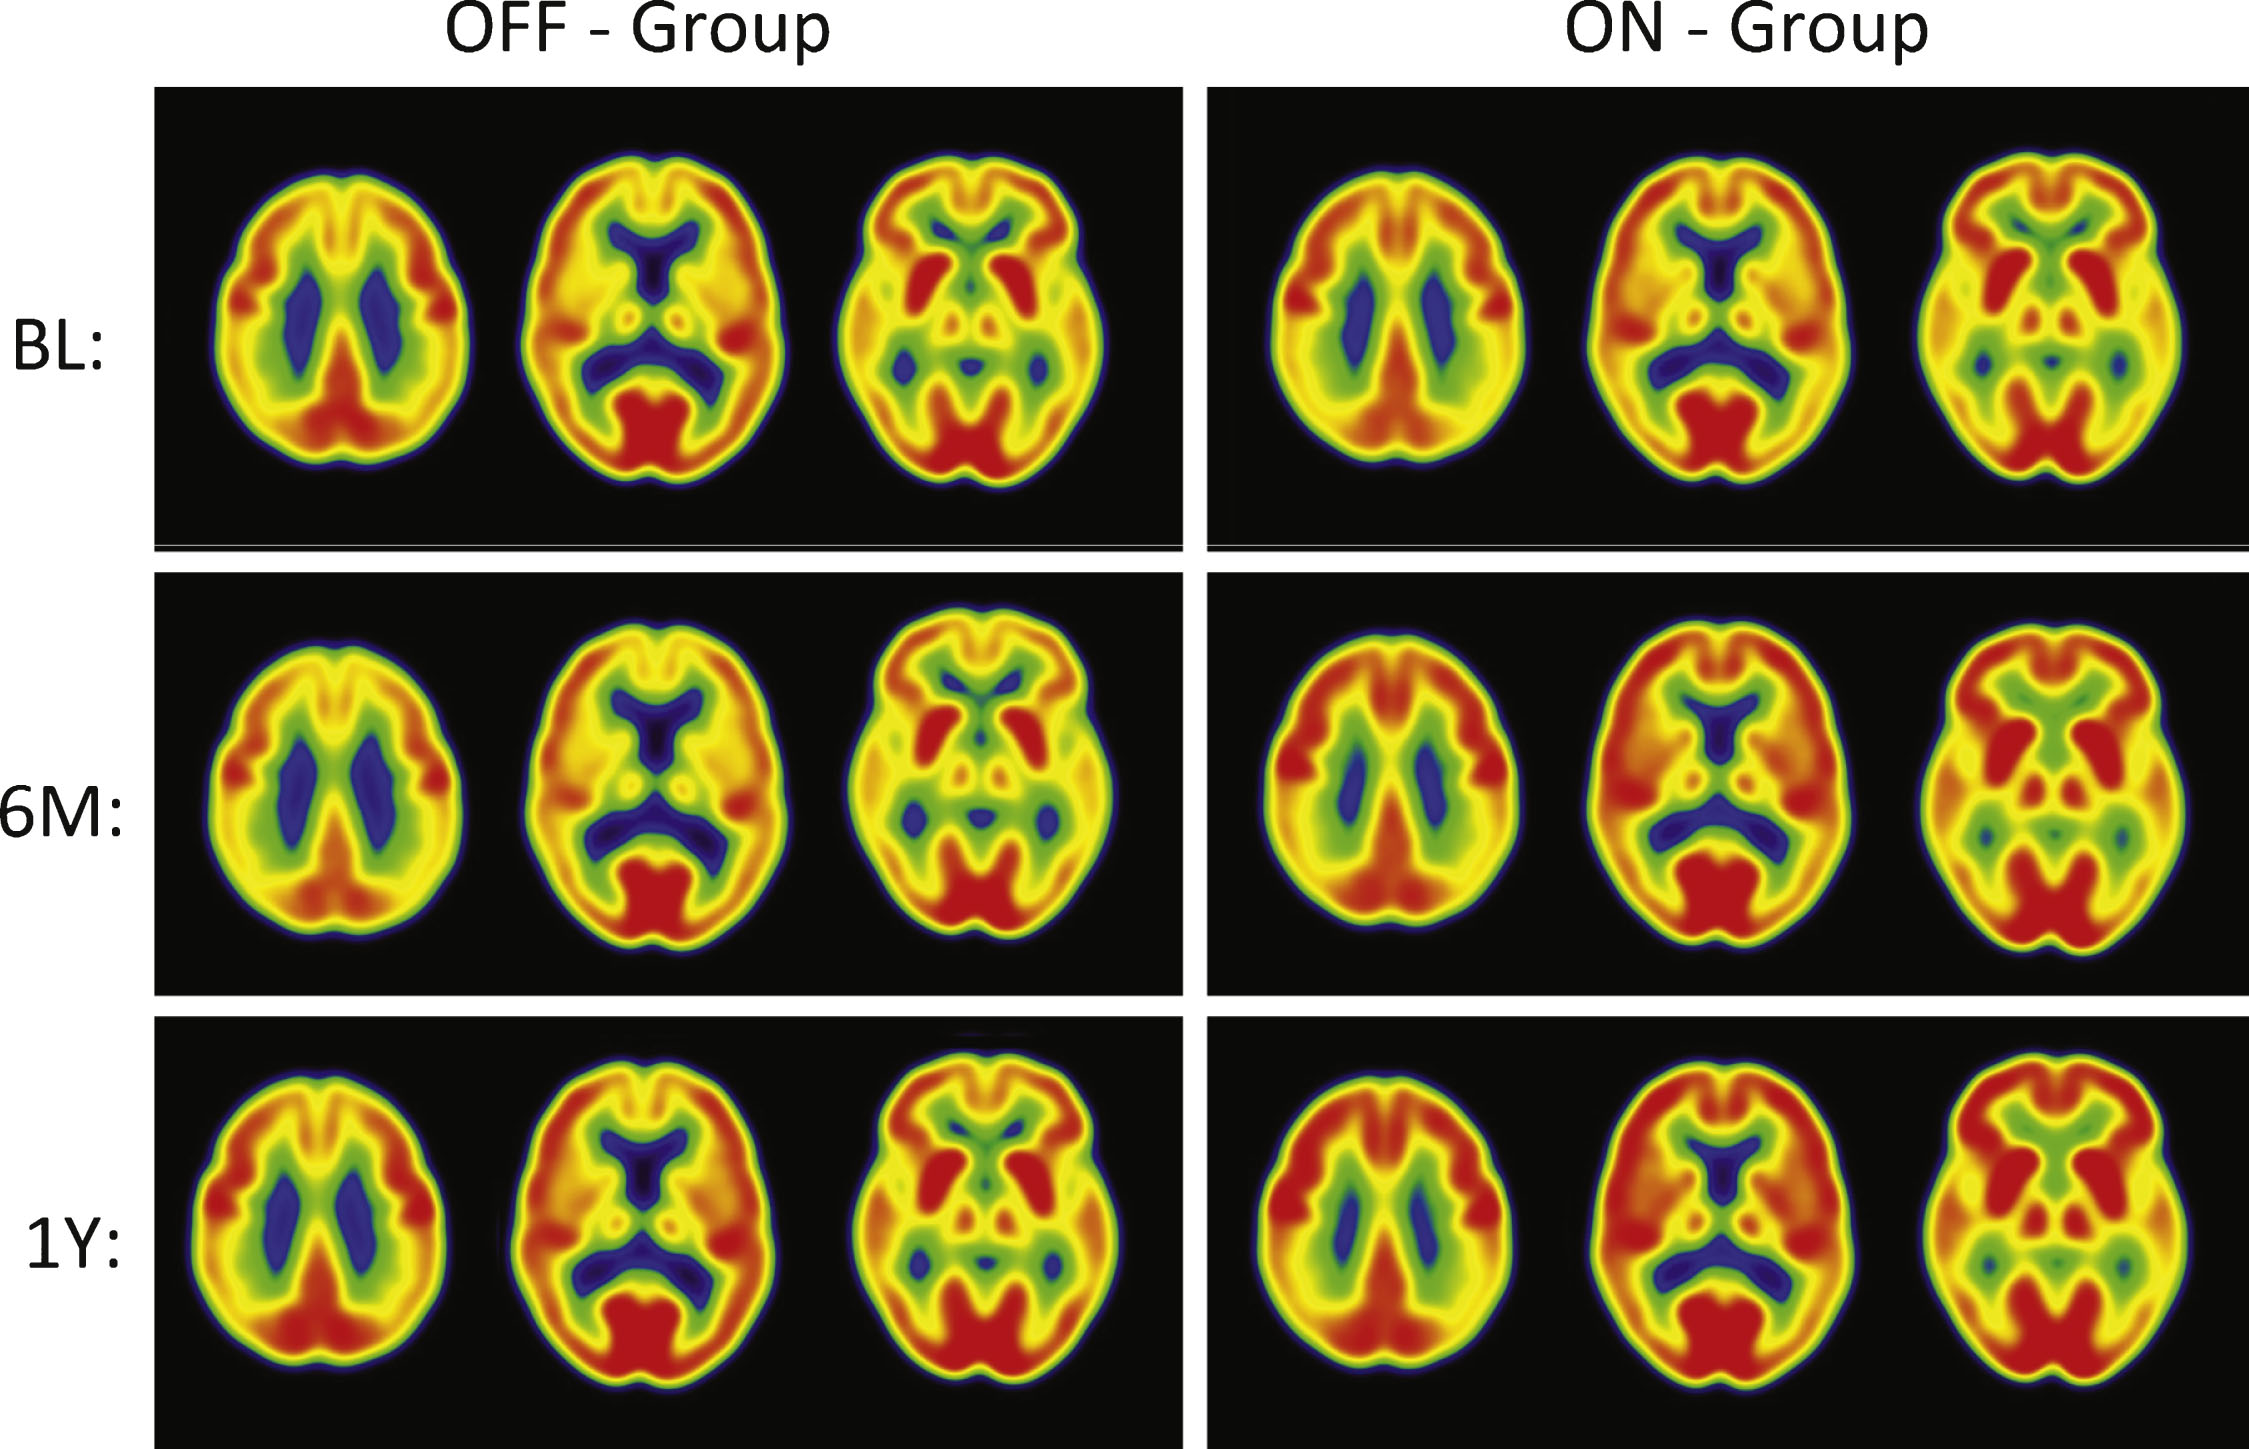 PET Cerebral glucose metabolism images by treatment groups. Summed Axial Images of standardized update values (SUV). BL, baseline, 6 months or 12 months after continuous bilateral deep brain stimulation (DBS) of the fornix. Representative axial sections show that patients in the “Off” group had stable or declining cortical glucose metabolism over time. In patients assigned to “On,” there were increases in brain metabolism at 6 months, particularly in the temporal and parietal regions, that were sustained at 12 months. The color scale indicates SUVs, with red showing highest, yellow and green intermediate and blue lowest. The patients remained on the same medications from baseline to 12 months while receiving DBS.